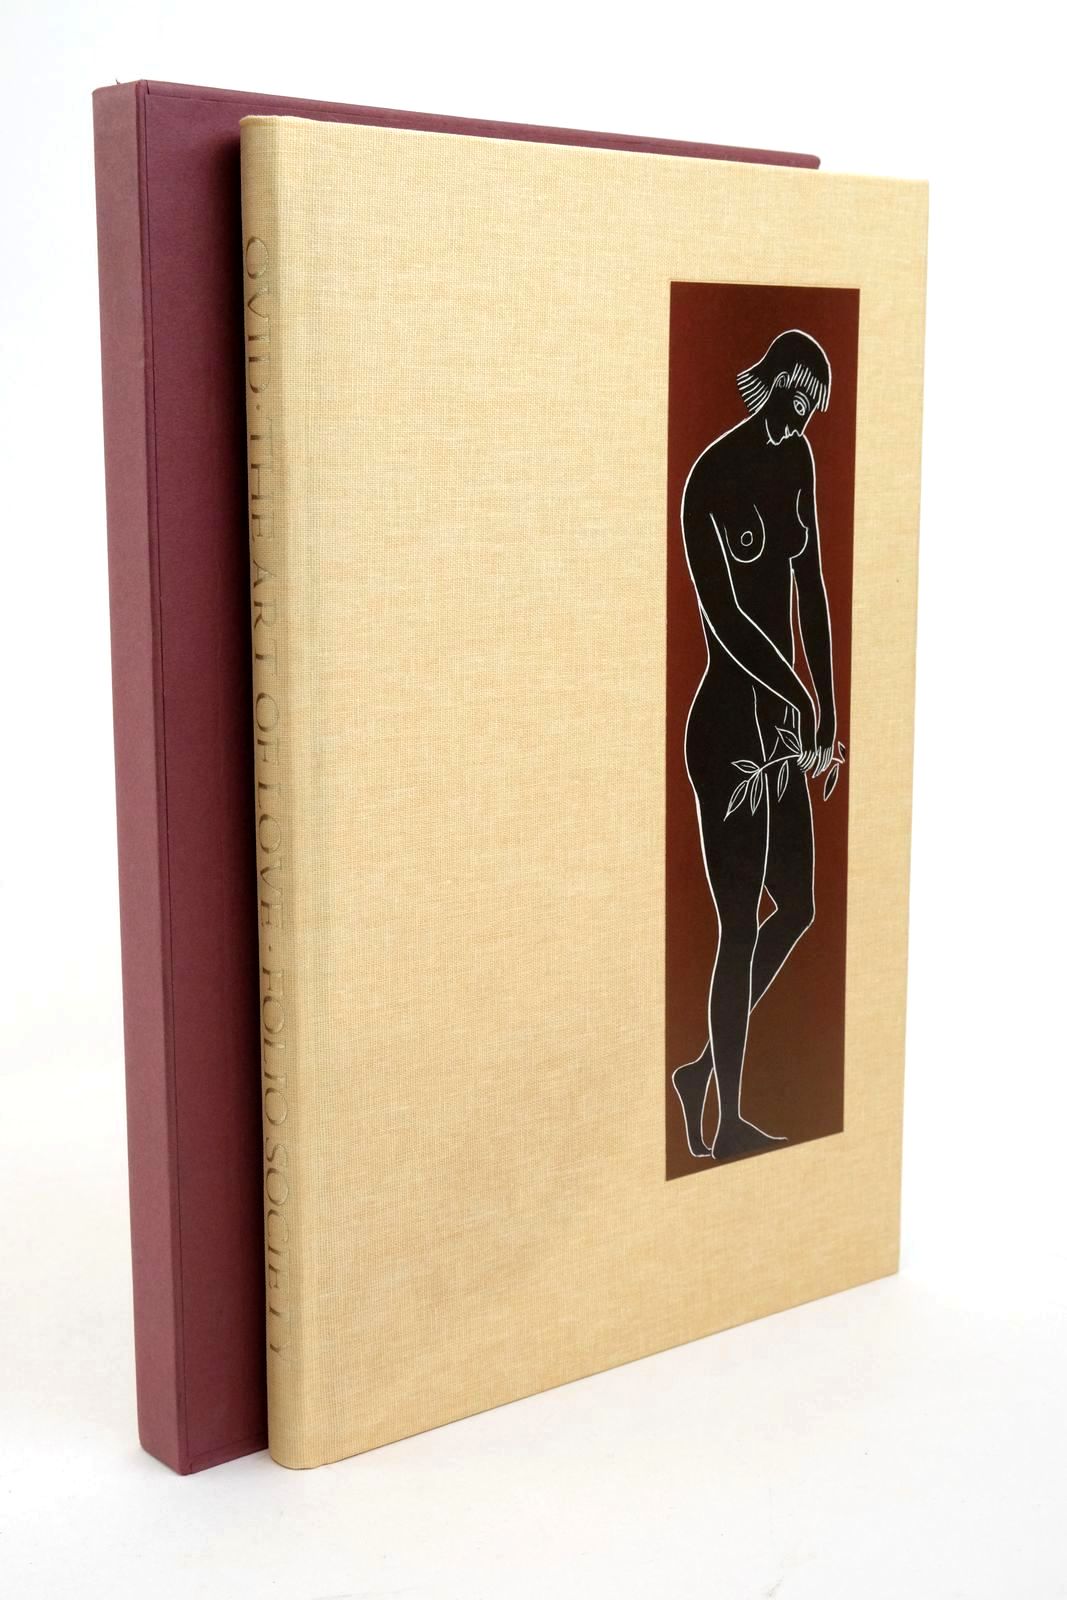 Photo of THE ART OF LOVE written by Ovid,  Naso, Publius Ovidius Michie, James illustrated by Baker, Grahame published by Folio Society (STOCK CODE: 1322856)  for sale by Stella & Rose's Books